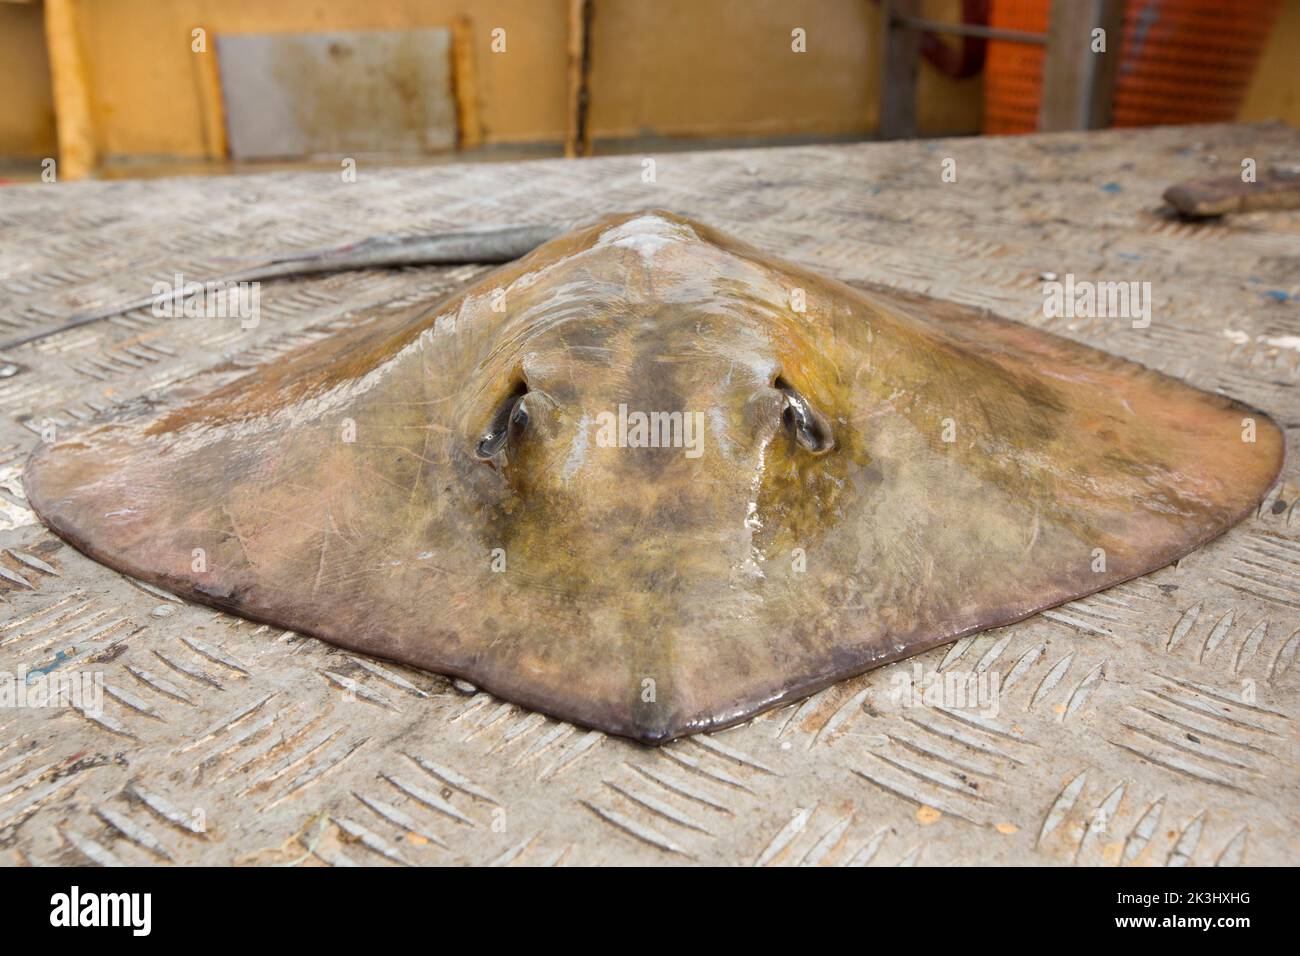 A sting ray, Dasyatis pastinaca, on the deck of a fishing boat before being released. Sting rays possess a venomous, barbed stinger, or harpoon, on th Stock Photo